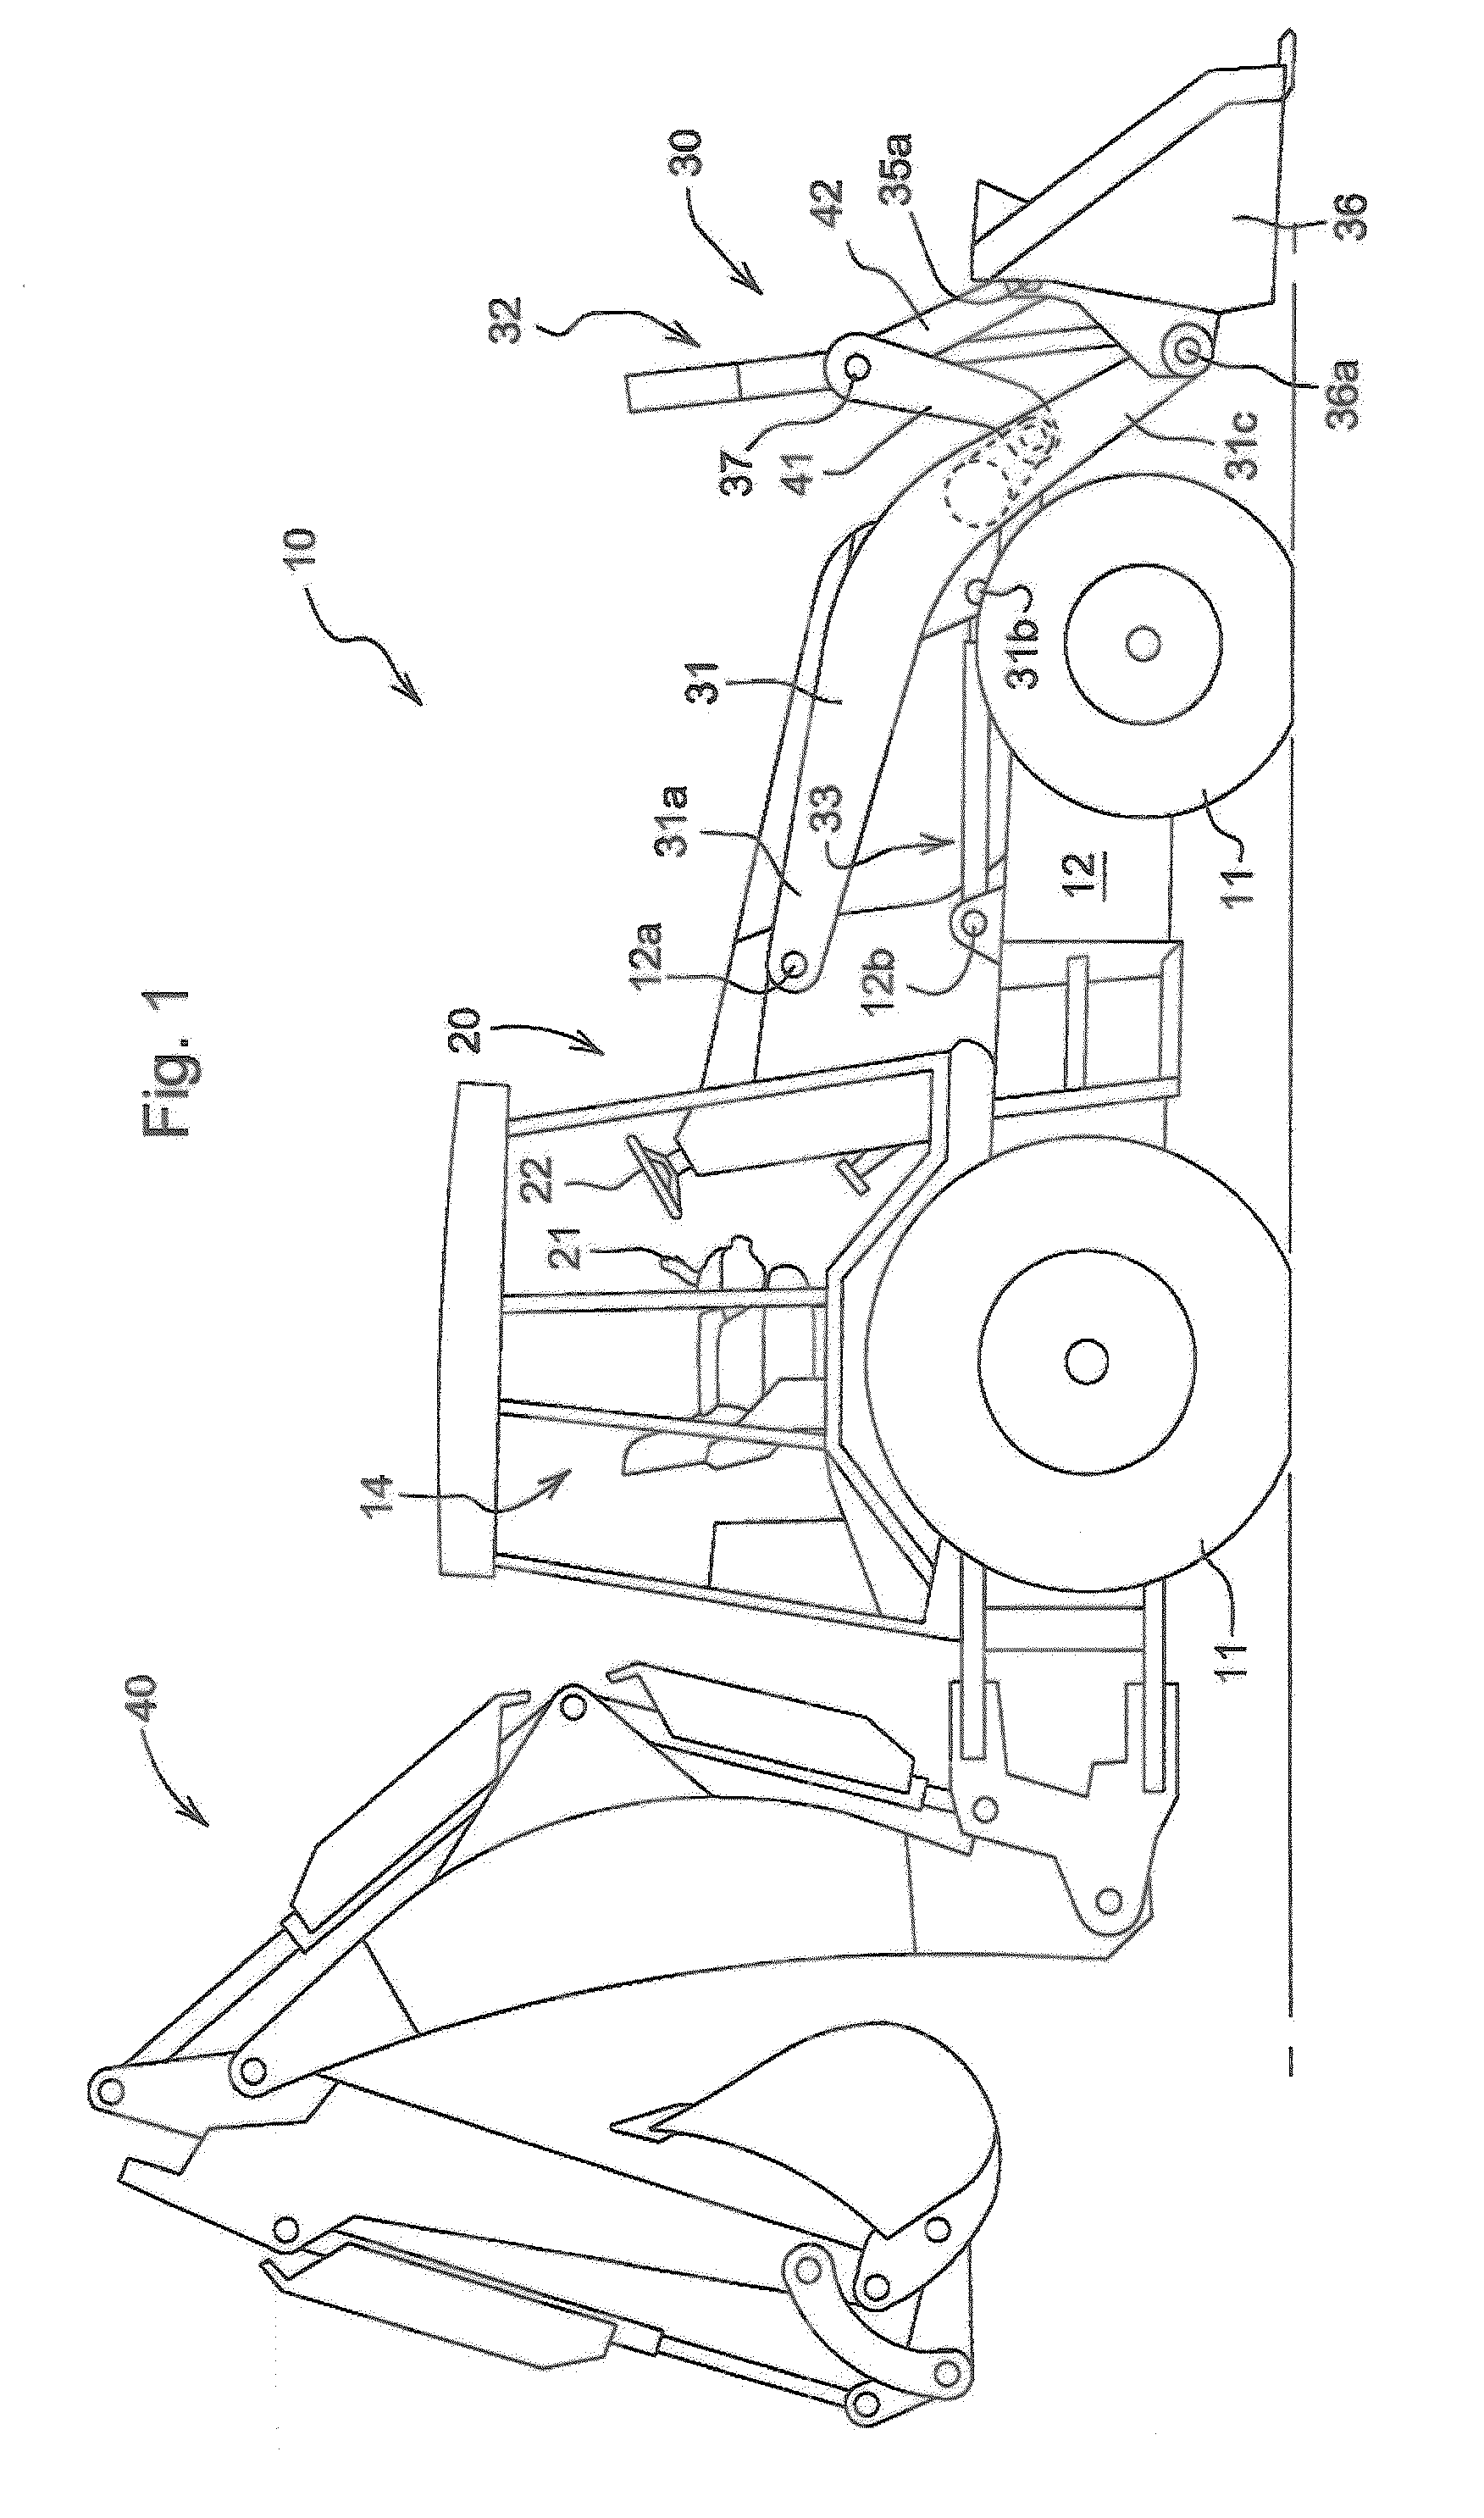 Electronic Parallel Lift And Return To Carry Or Float On A Backhoe Loader